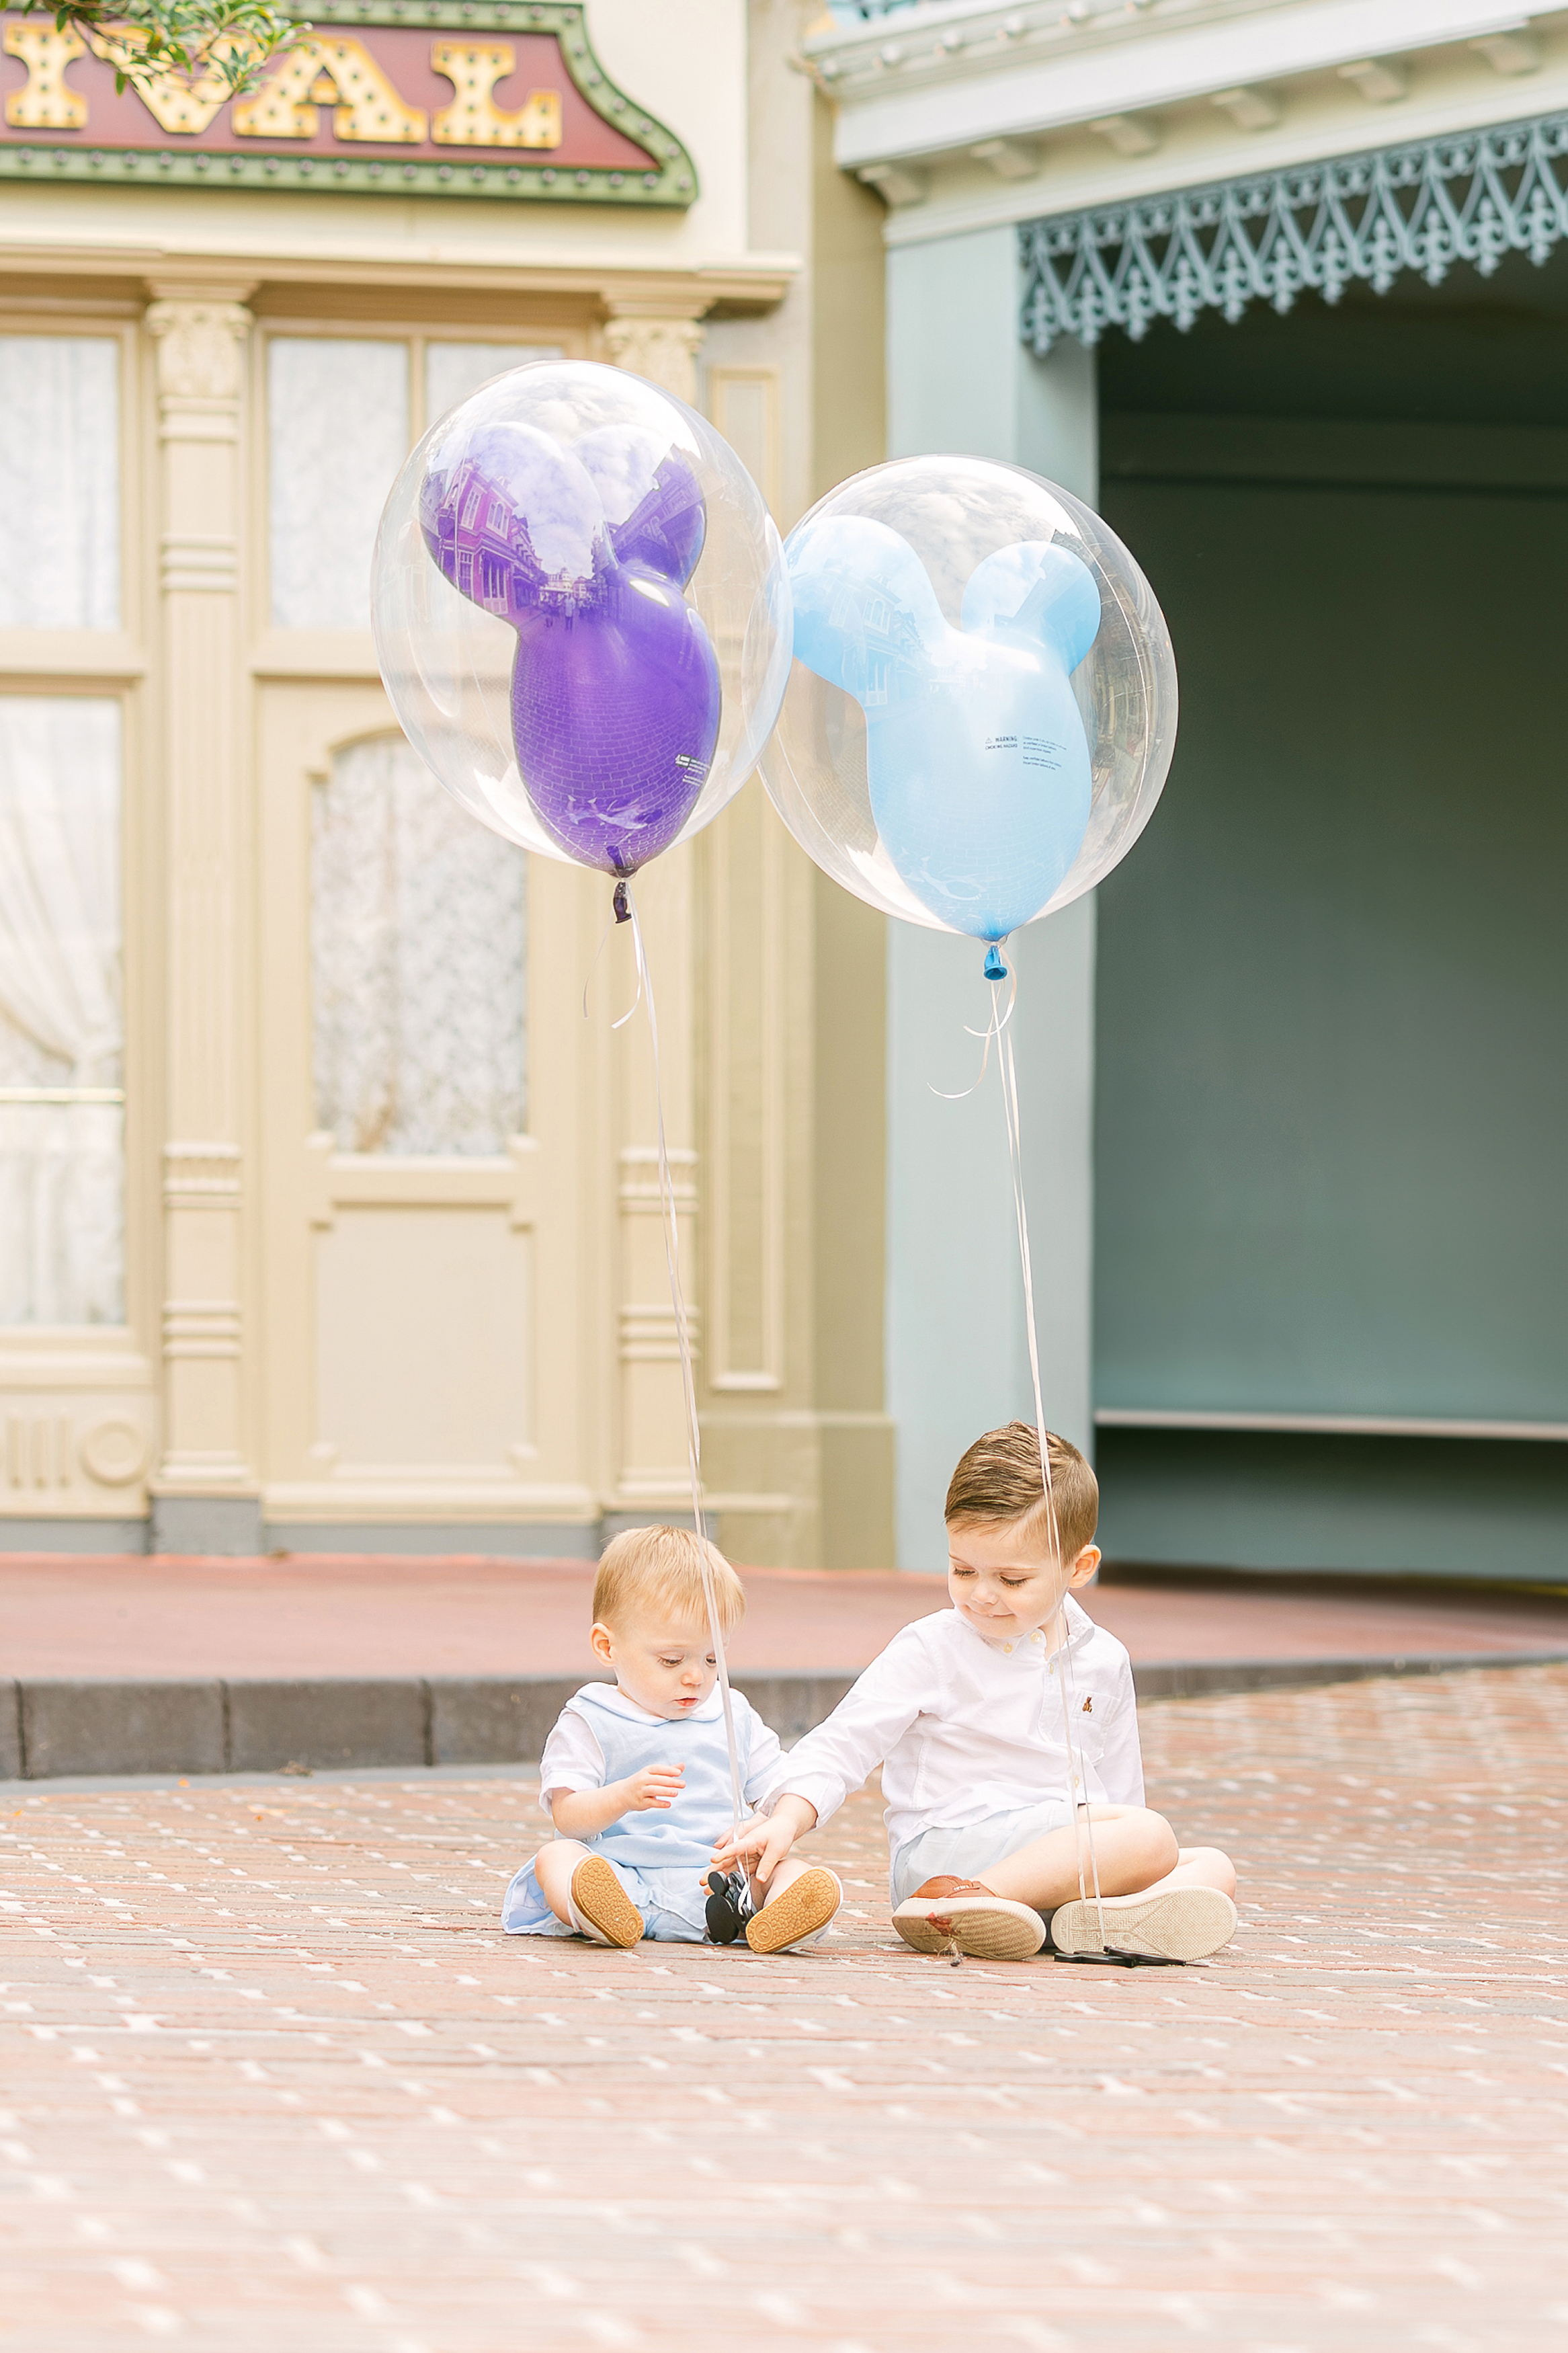 Two little boys holding Mickey Mouse balloons sit on a side street of Main Street U.S.A.